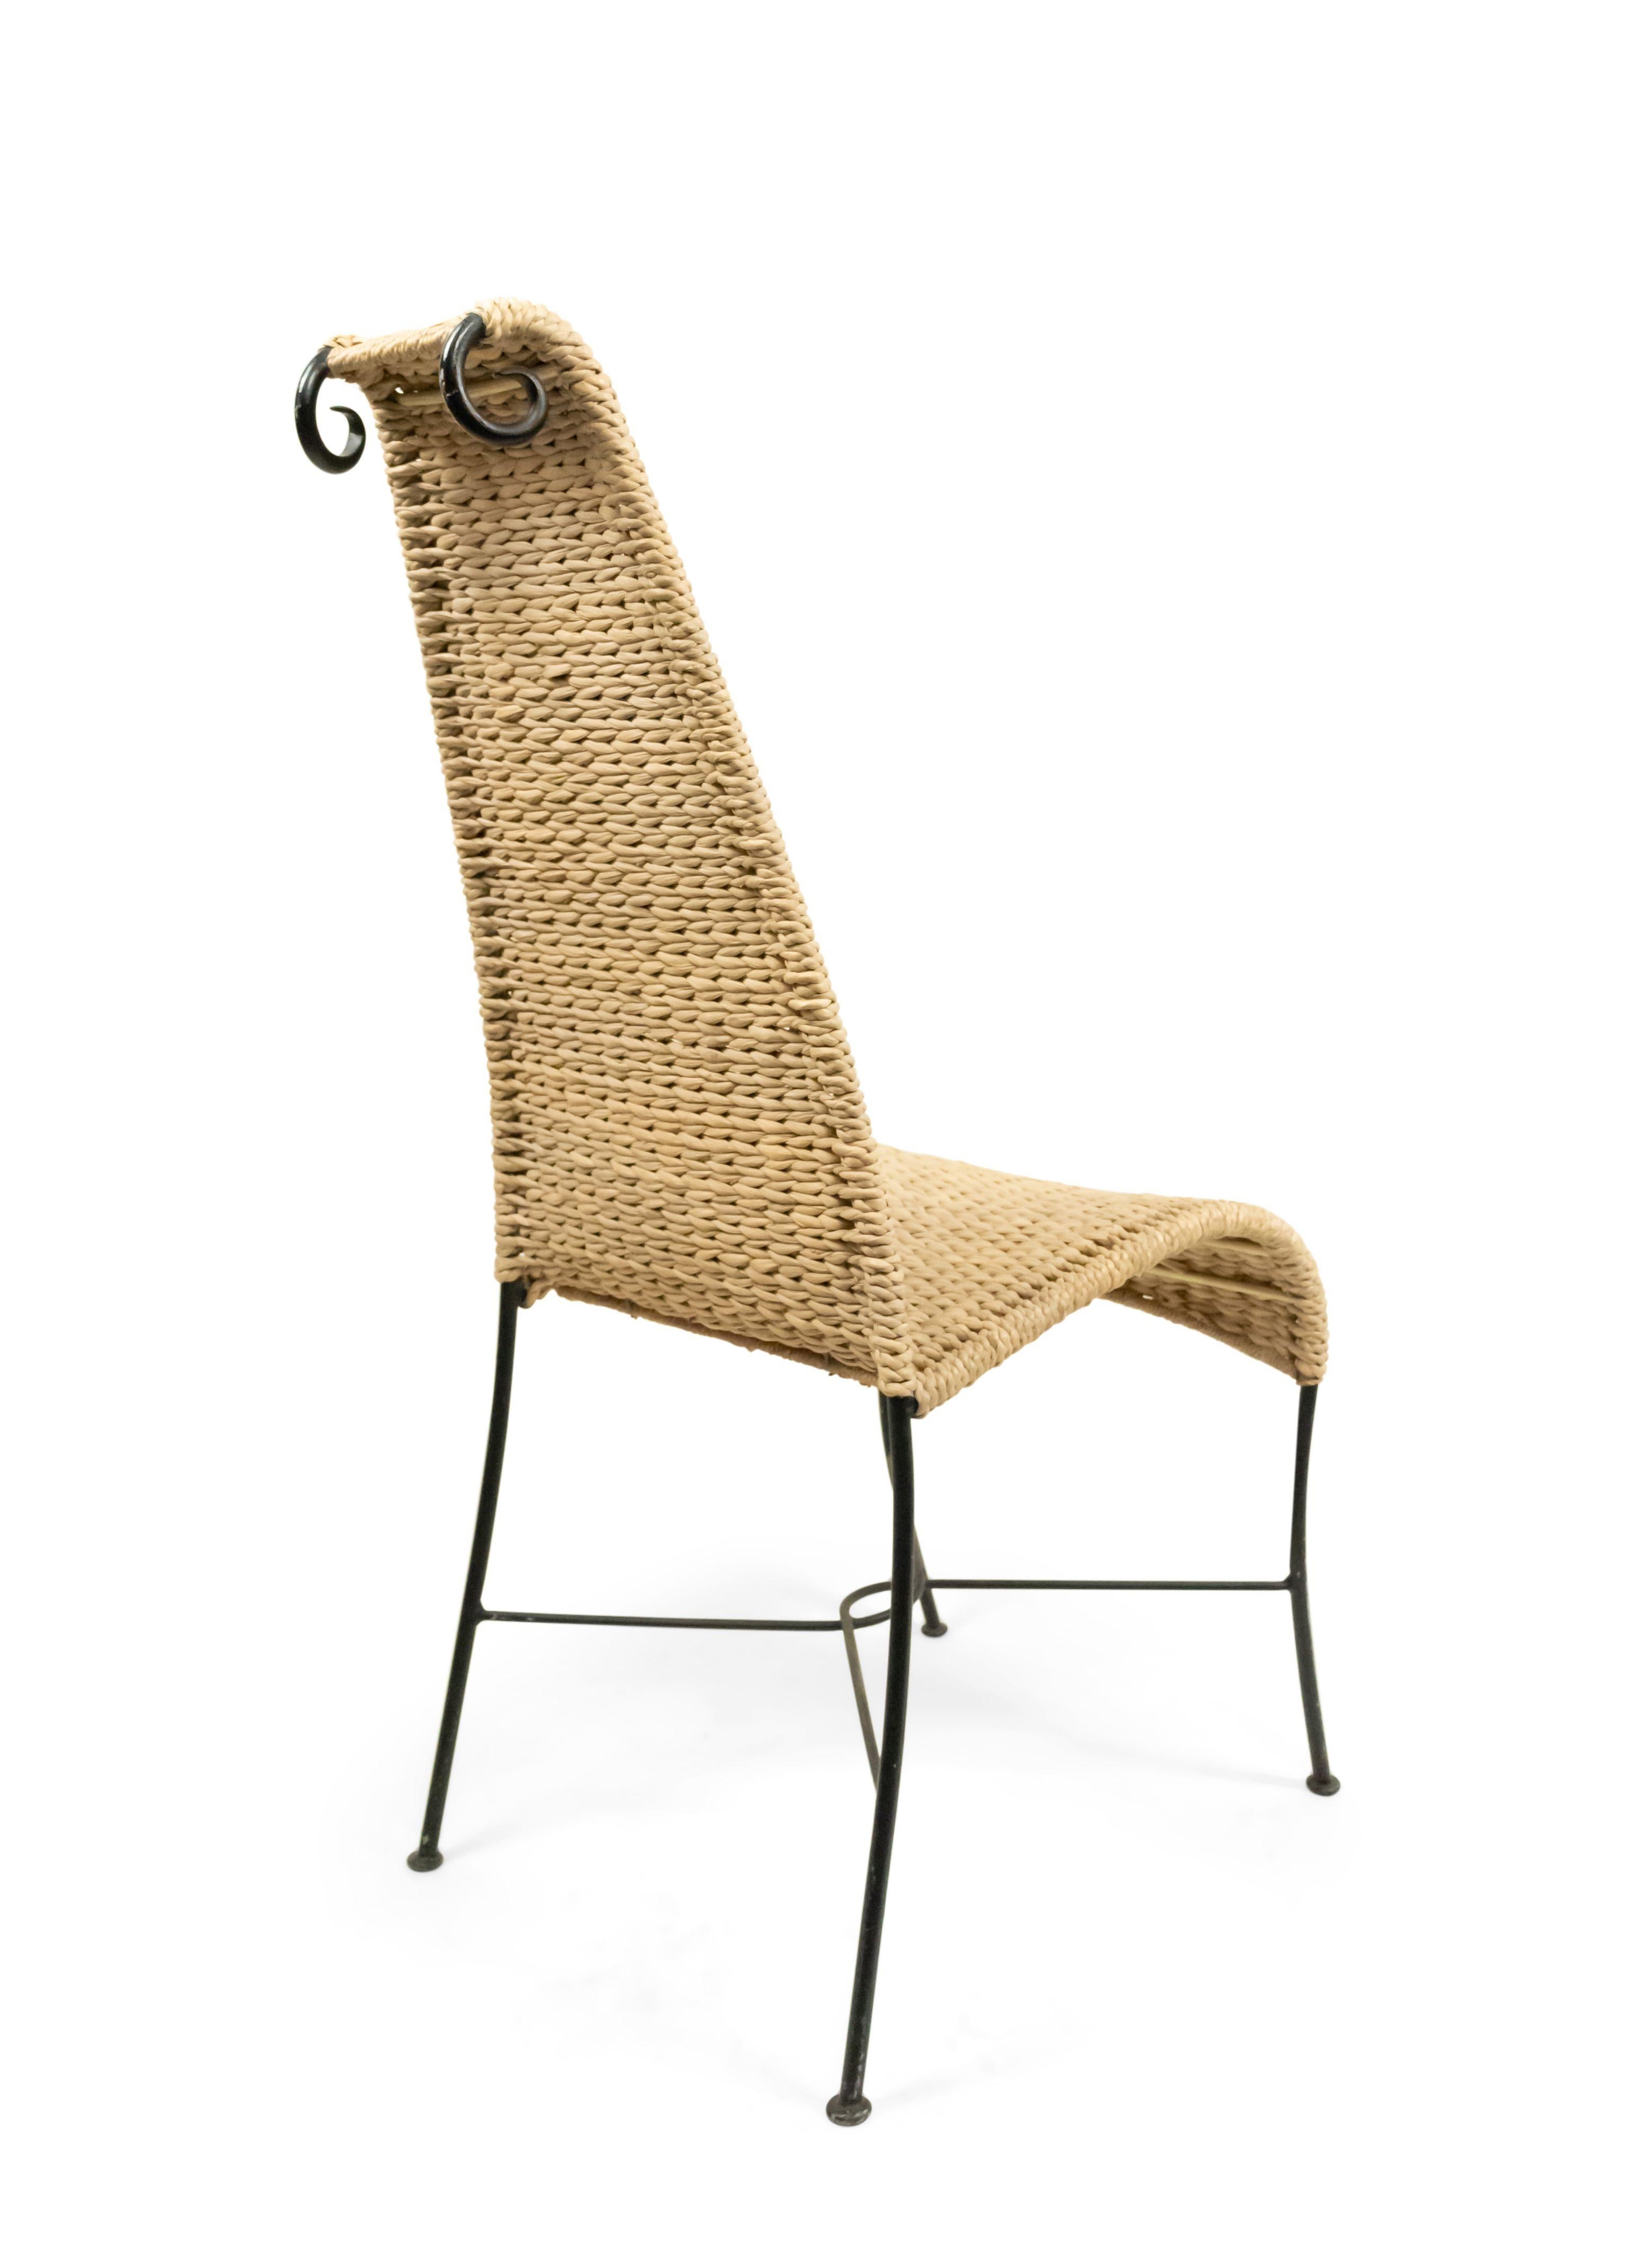 American Post-War Rattan Side Chair For Sale 5